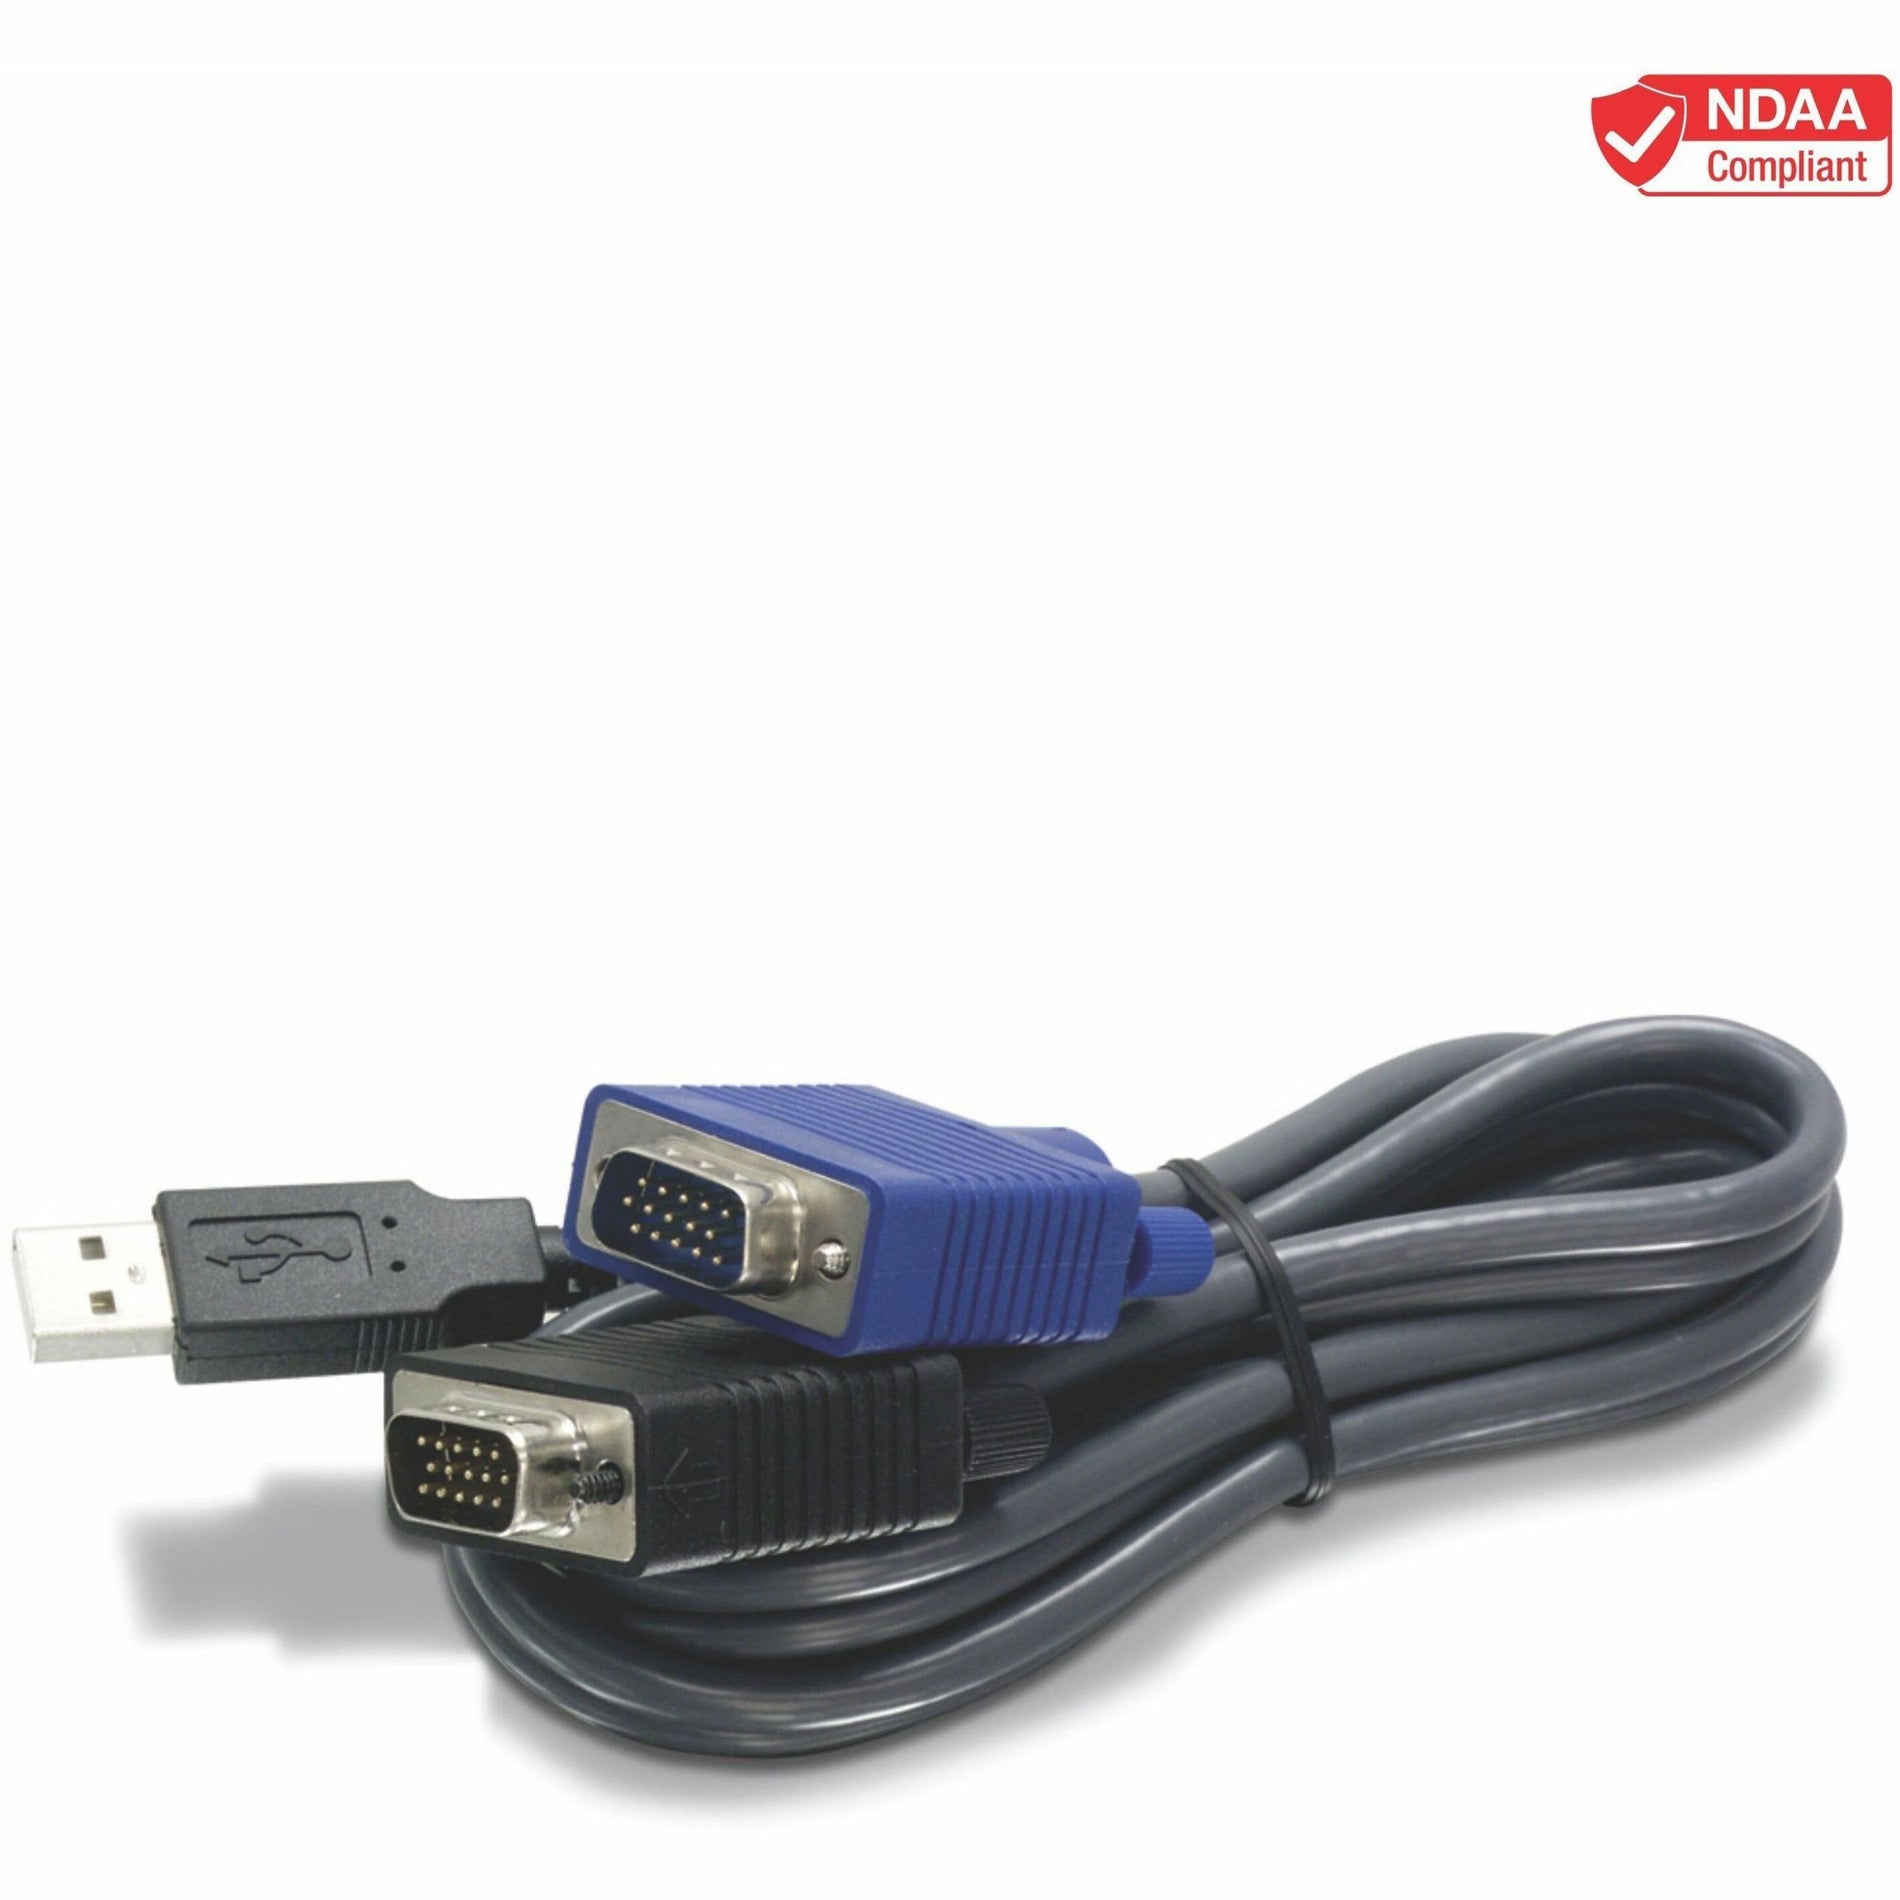 TRENDnet TK-CU10 10-feet USB KVM Cable, Connect Computers with VGA and USB Ports